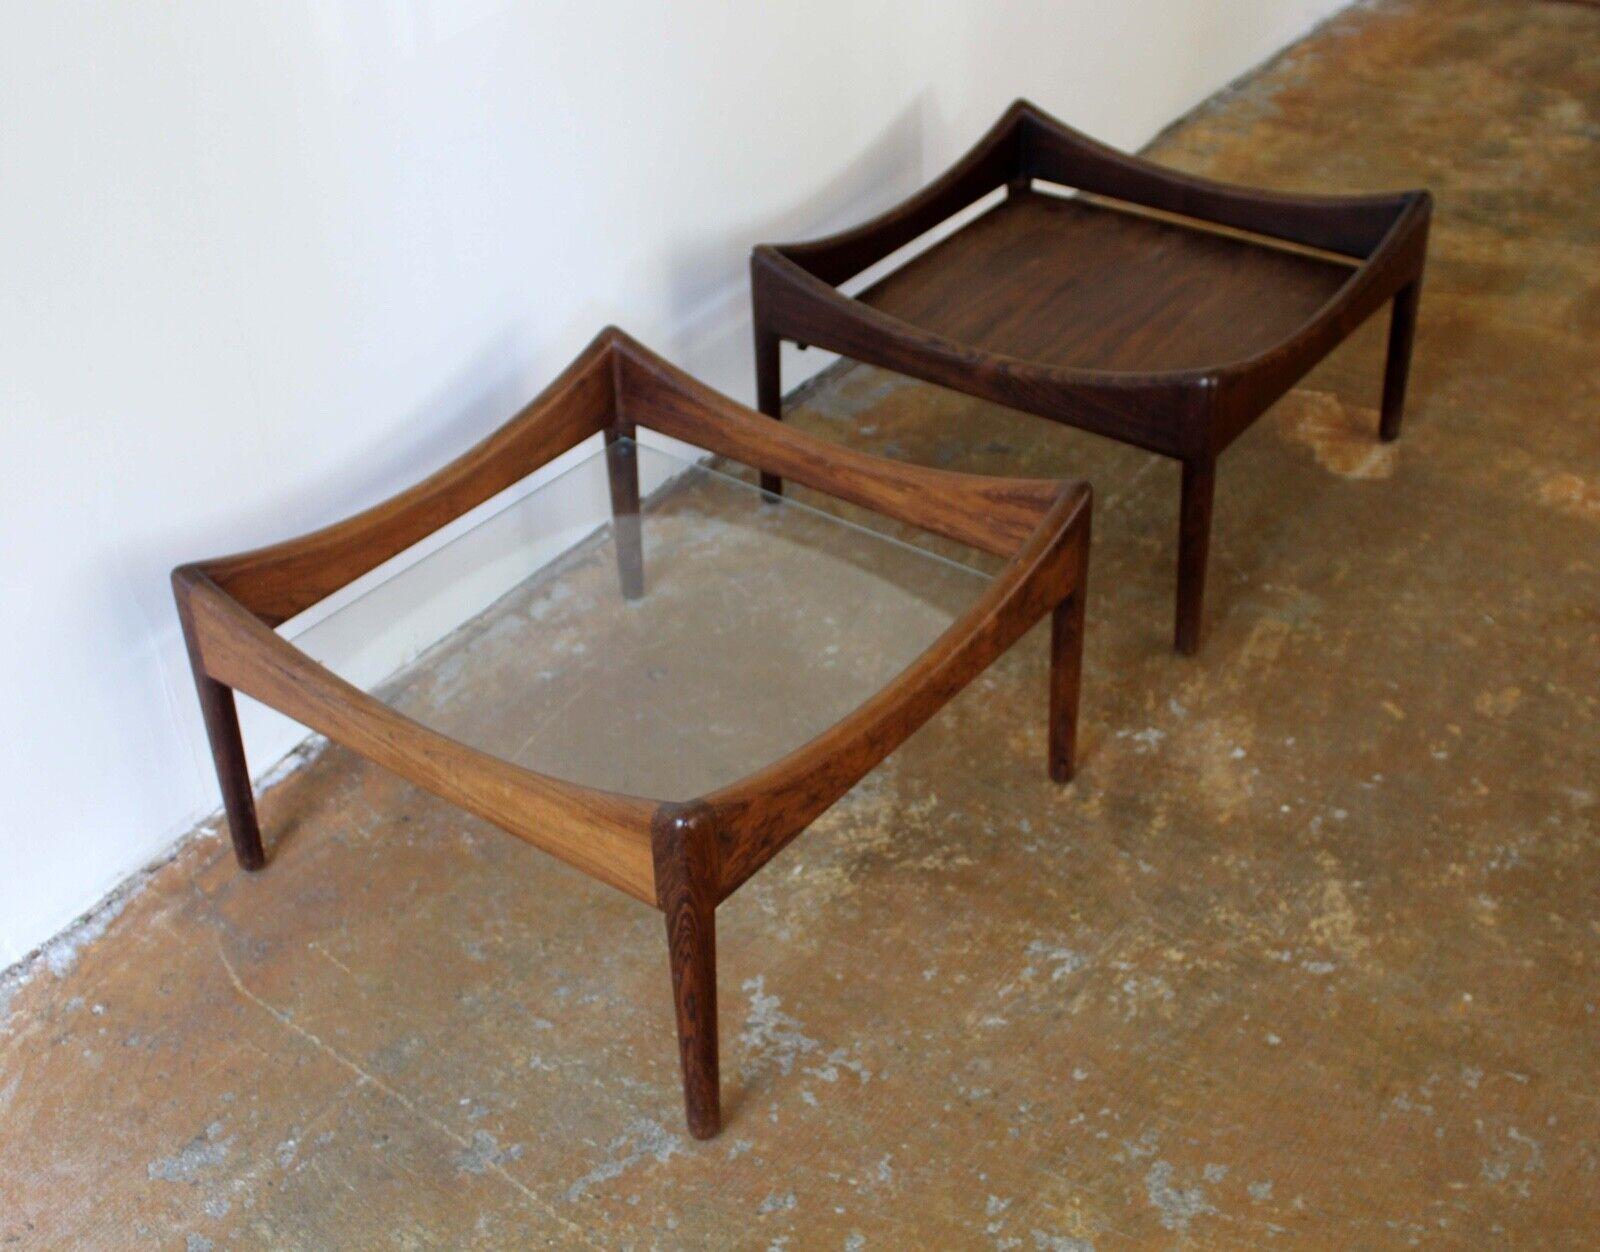 We present a pair of stunning rosewood end side tables by Danish designer Kristian Vedel. What makes them especially interesting is that one has a floating glass top and the other has a floating rosewood top. In excellent condition. Dimensions: 22